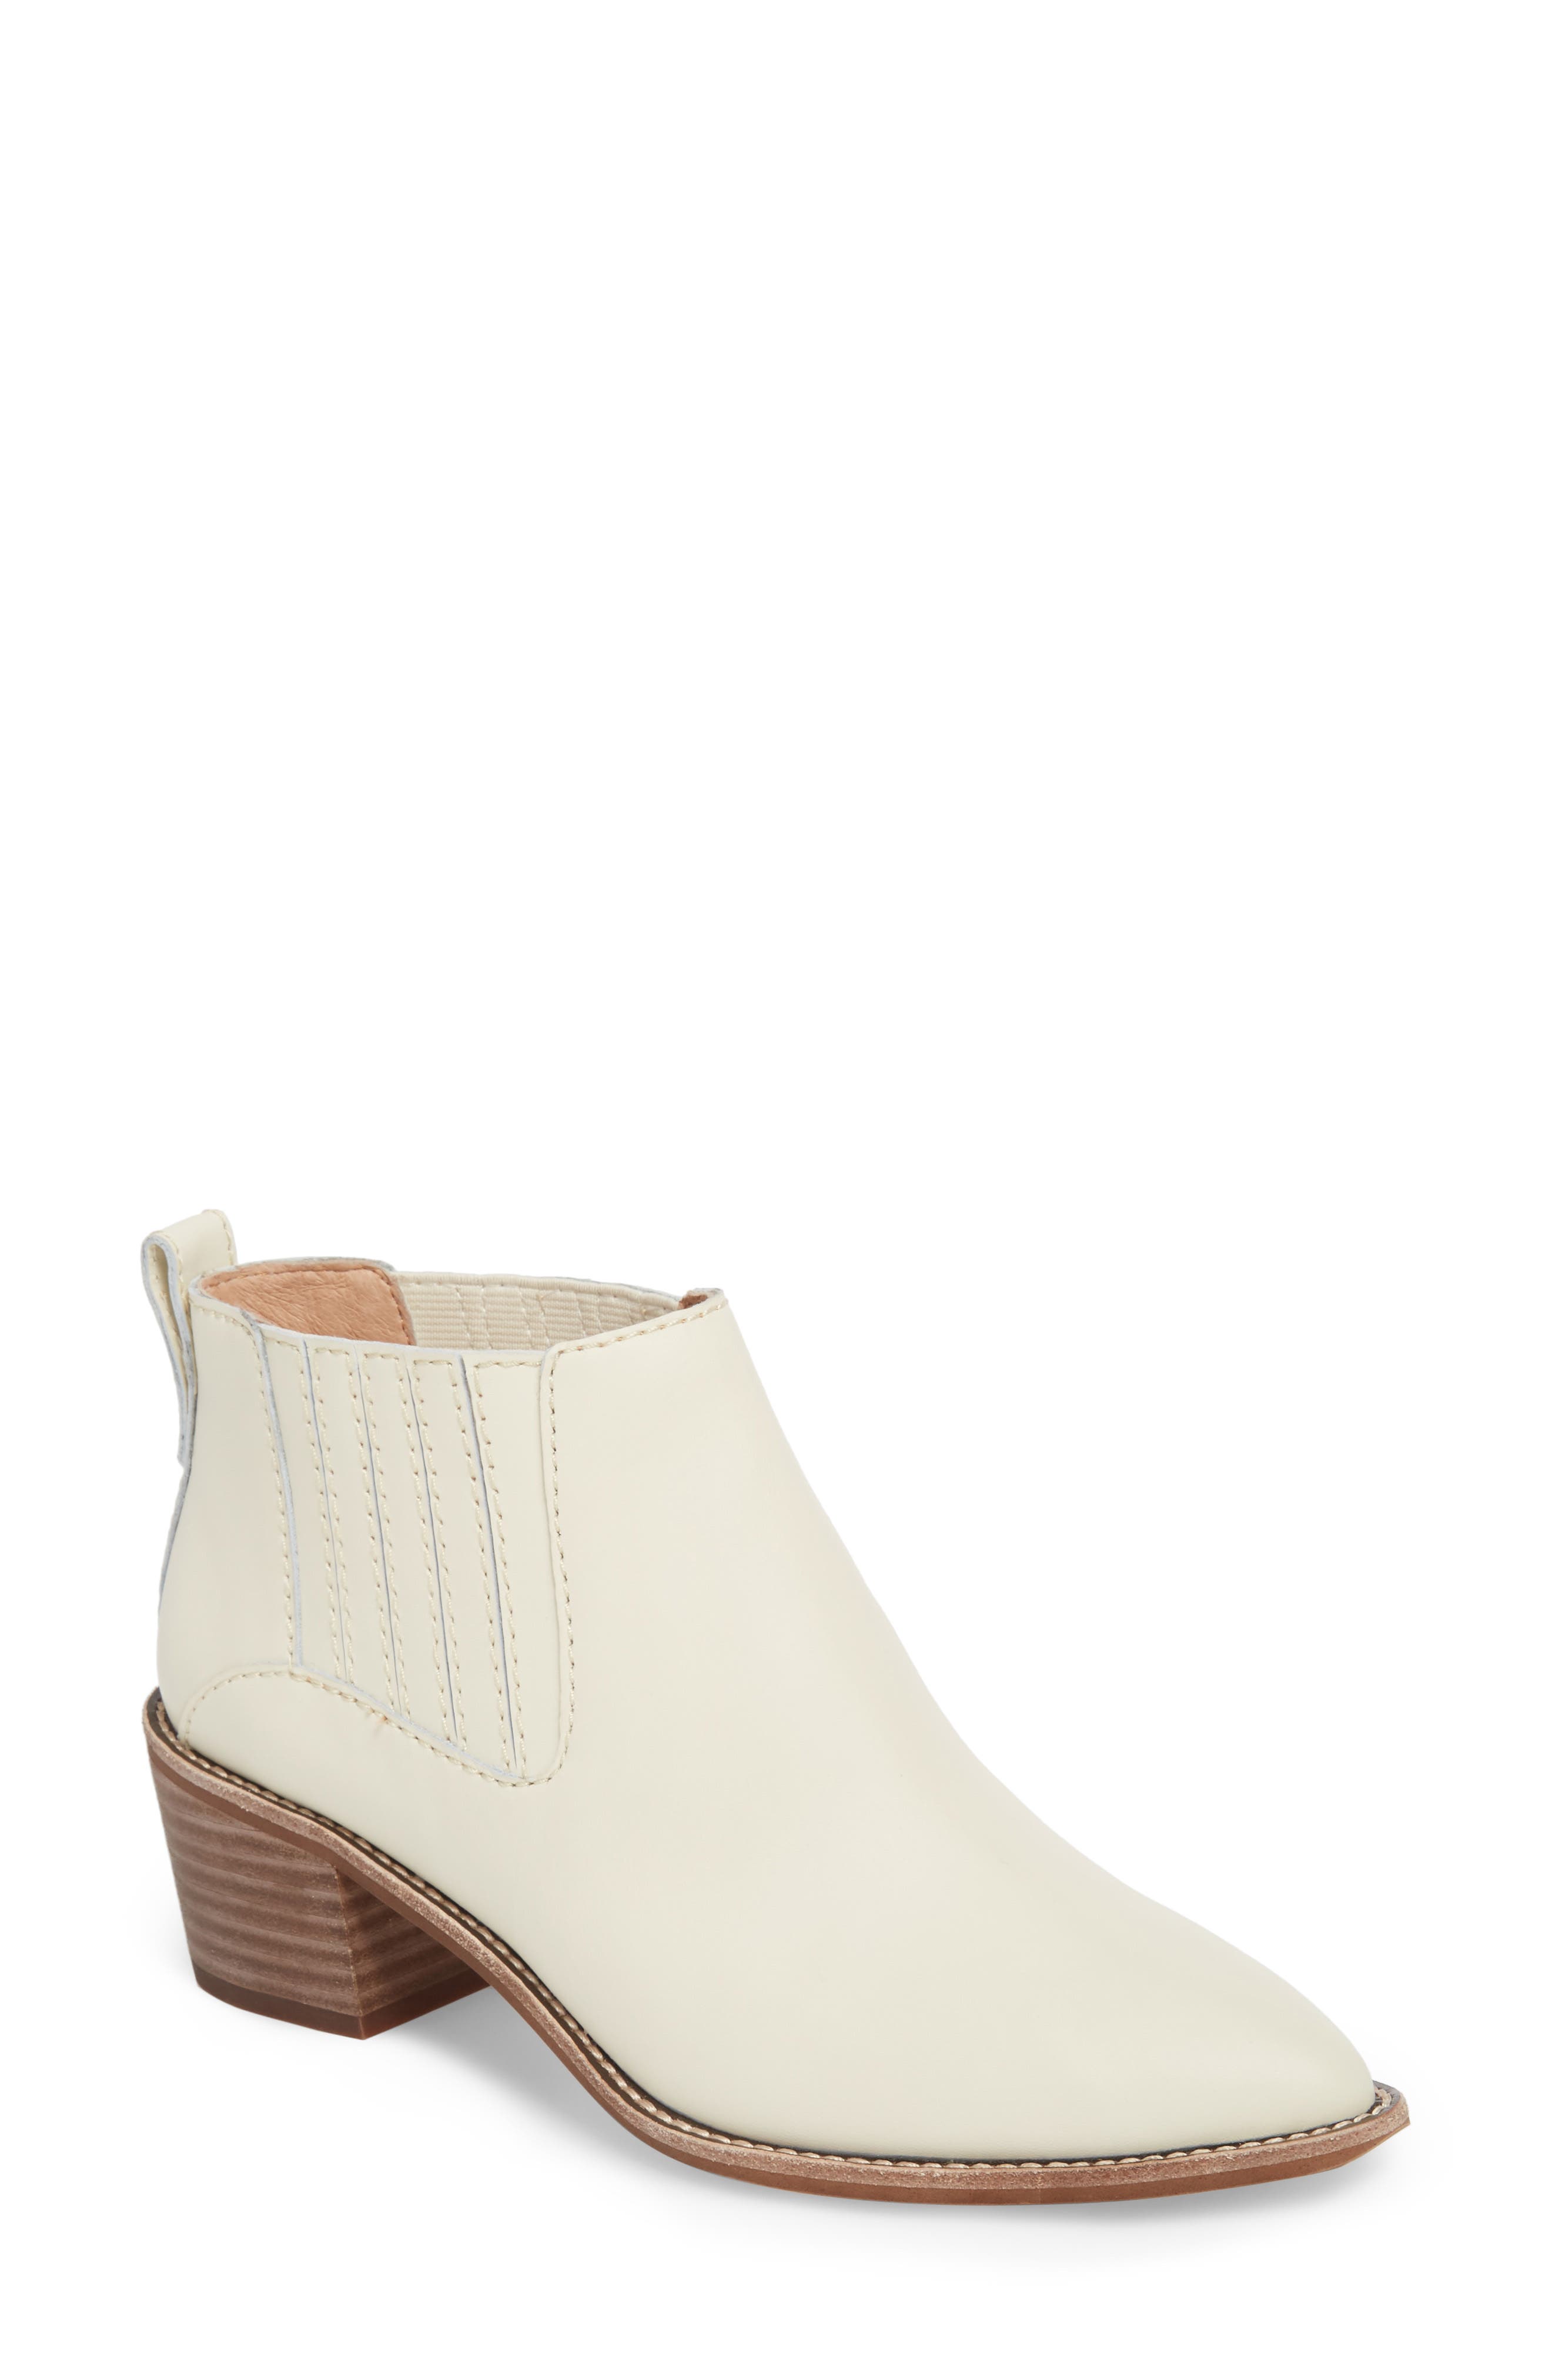 madewell nordstrom shoes